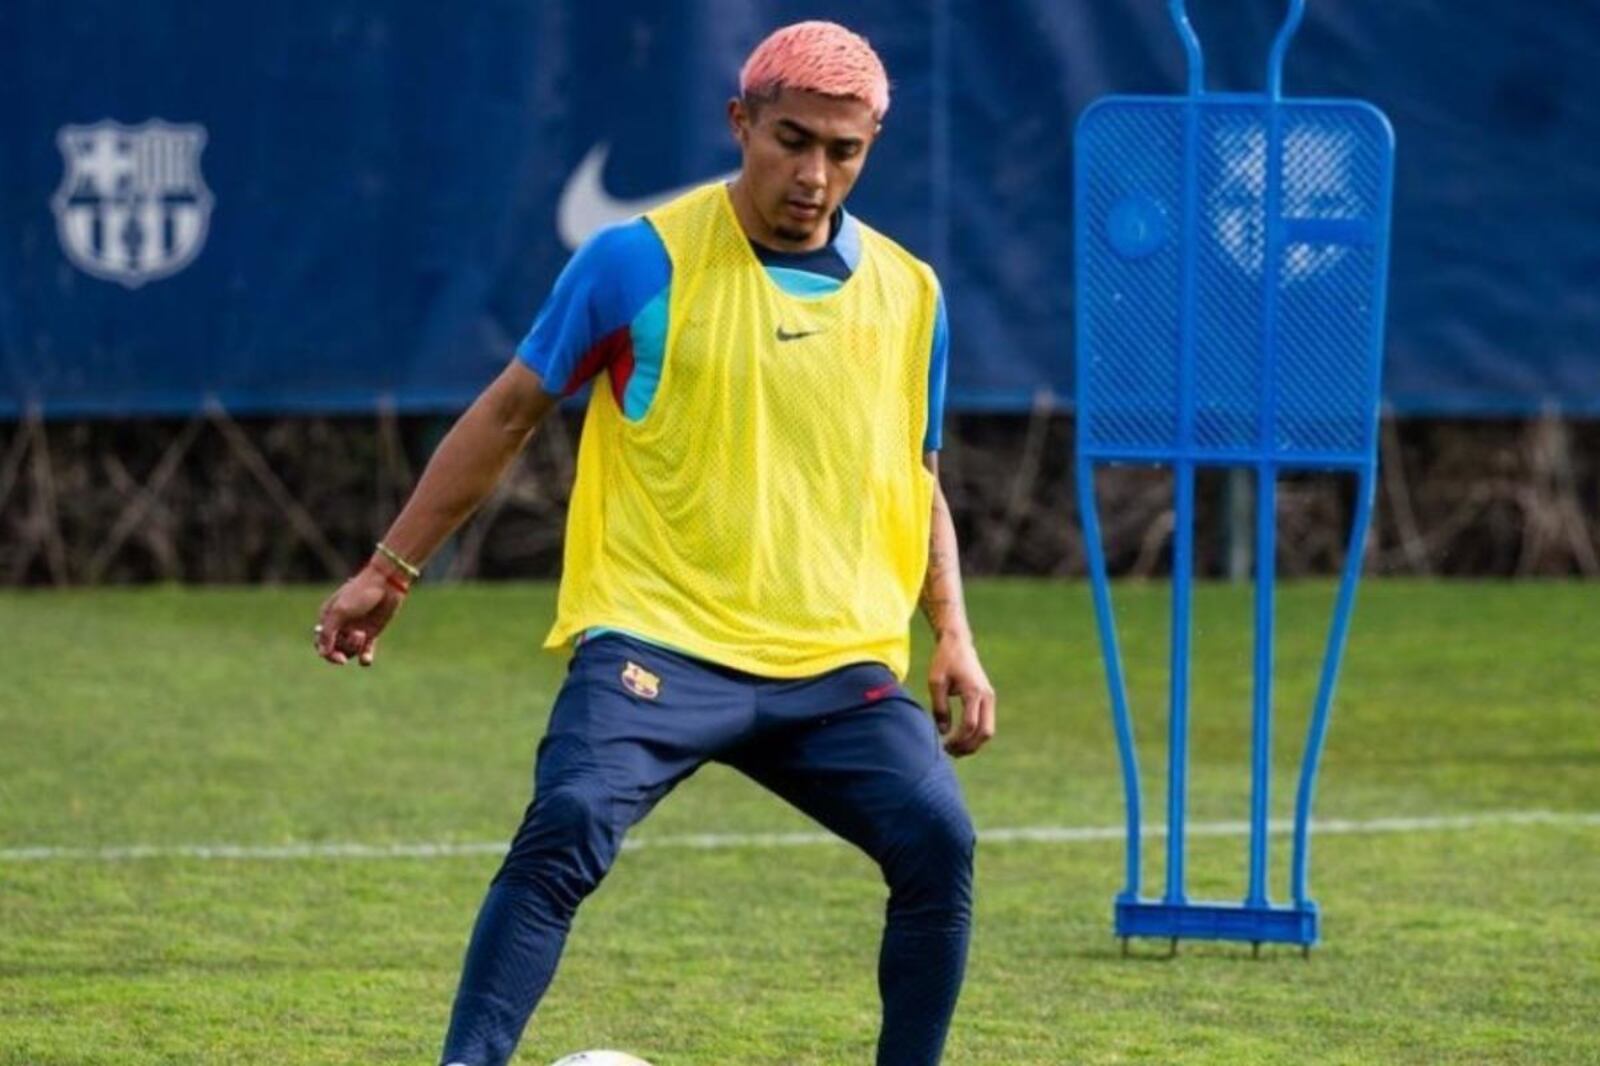 The action with which Julián Araujo impressed in his first training session with Barcelona